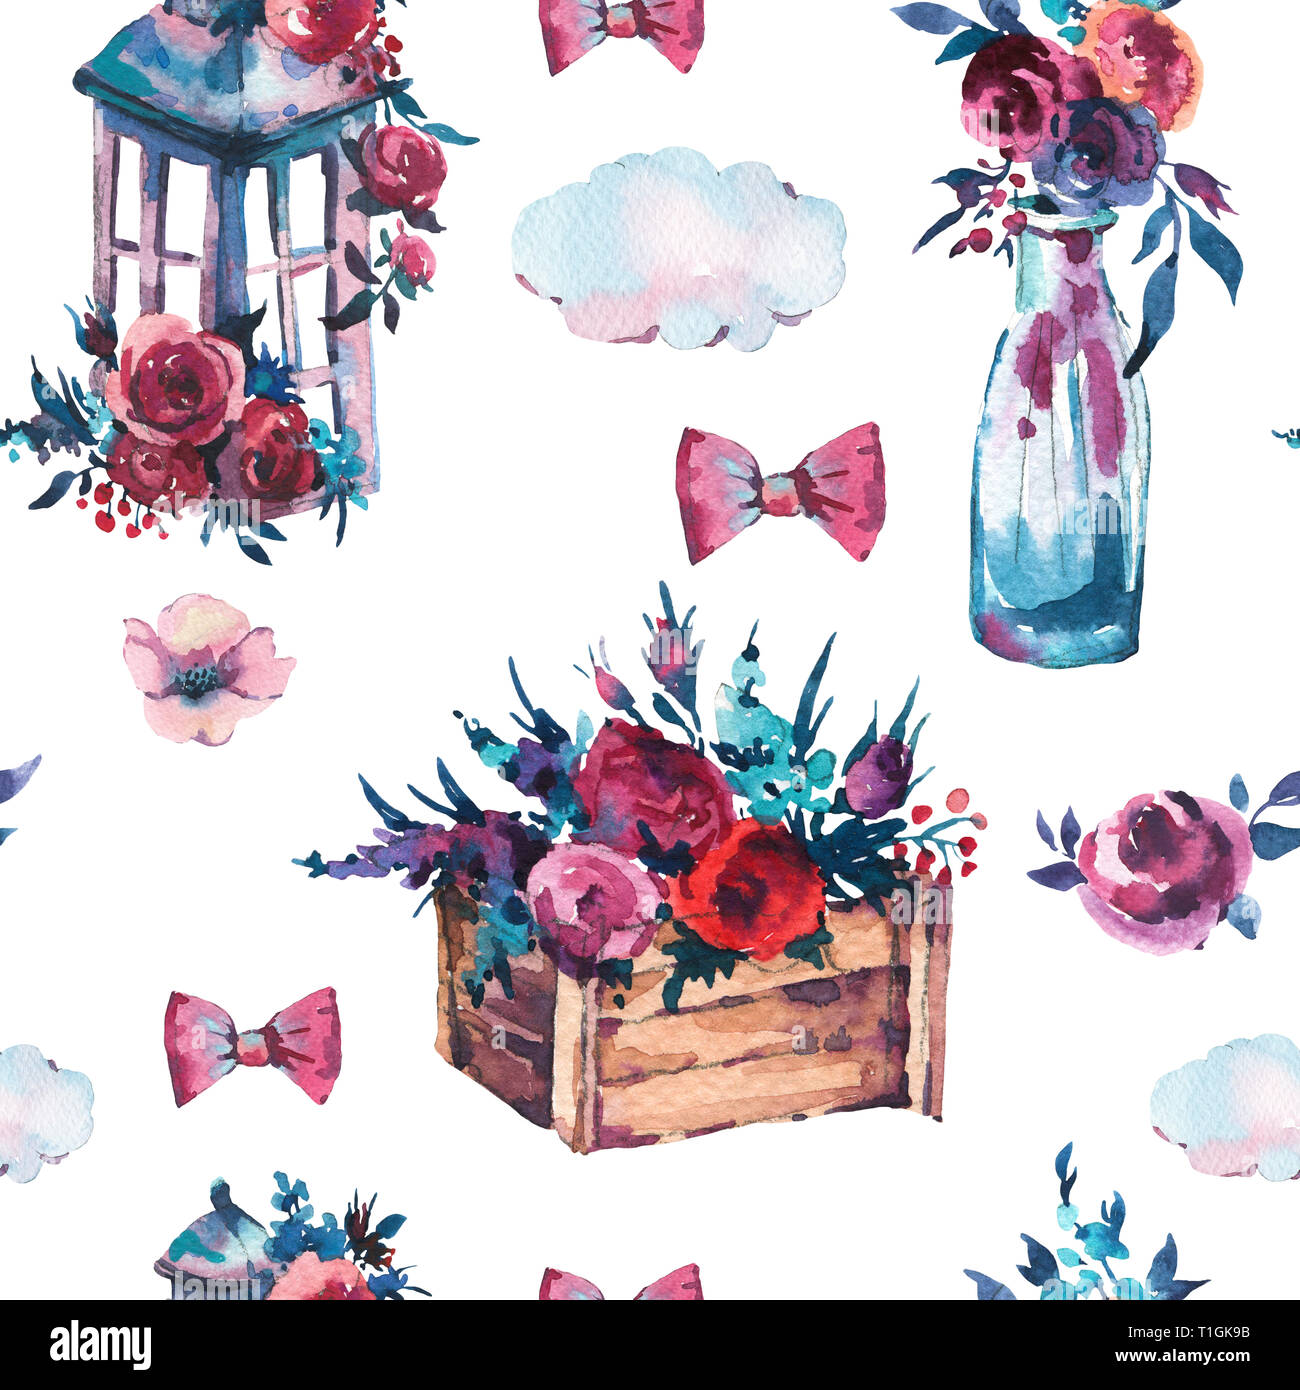 Watercolor seamless pattern of bottle with red rose, shabby lantern, flowers wooden box on white background. Boho chic style illustration Stock Photo